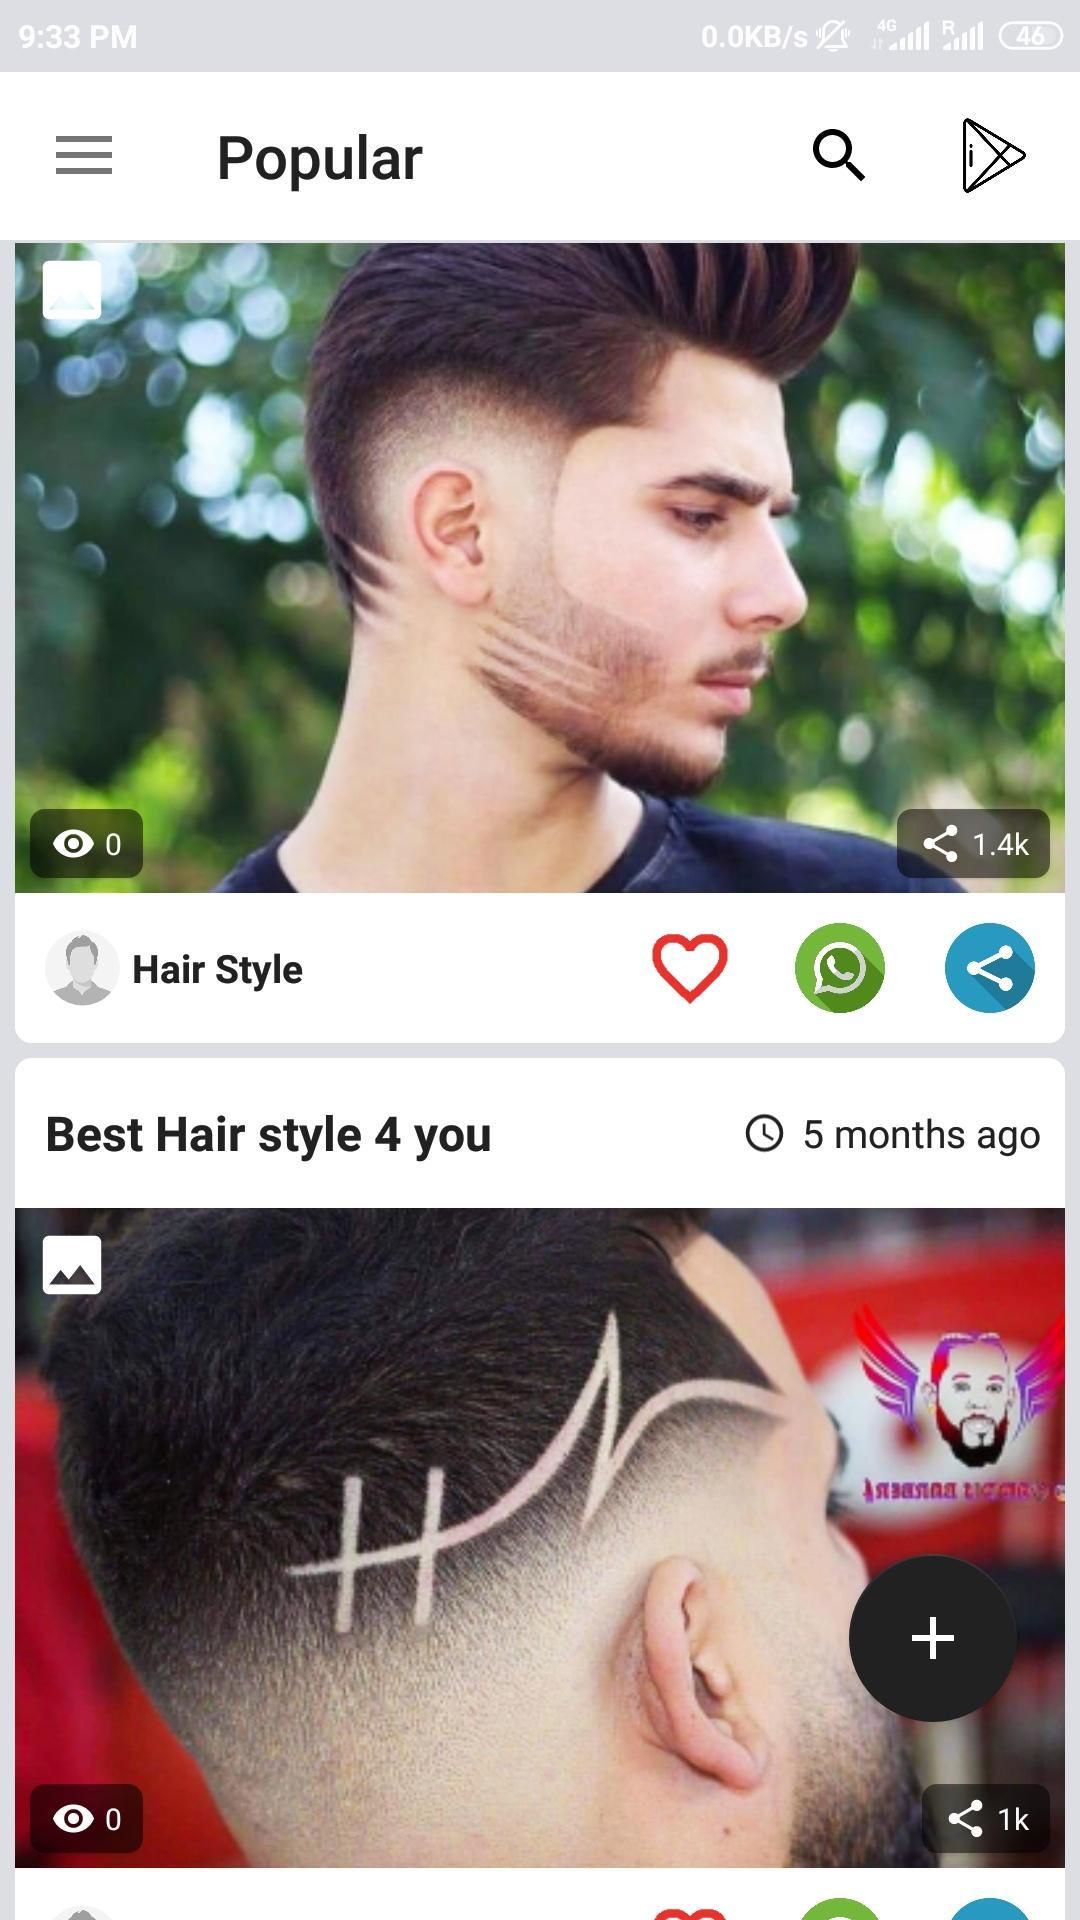 Fire haircut video | Hair on Fire: Barber plays with blaze to style  customer's hair, makes netizens scream [VIDEO] | Trending & Viral News